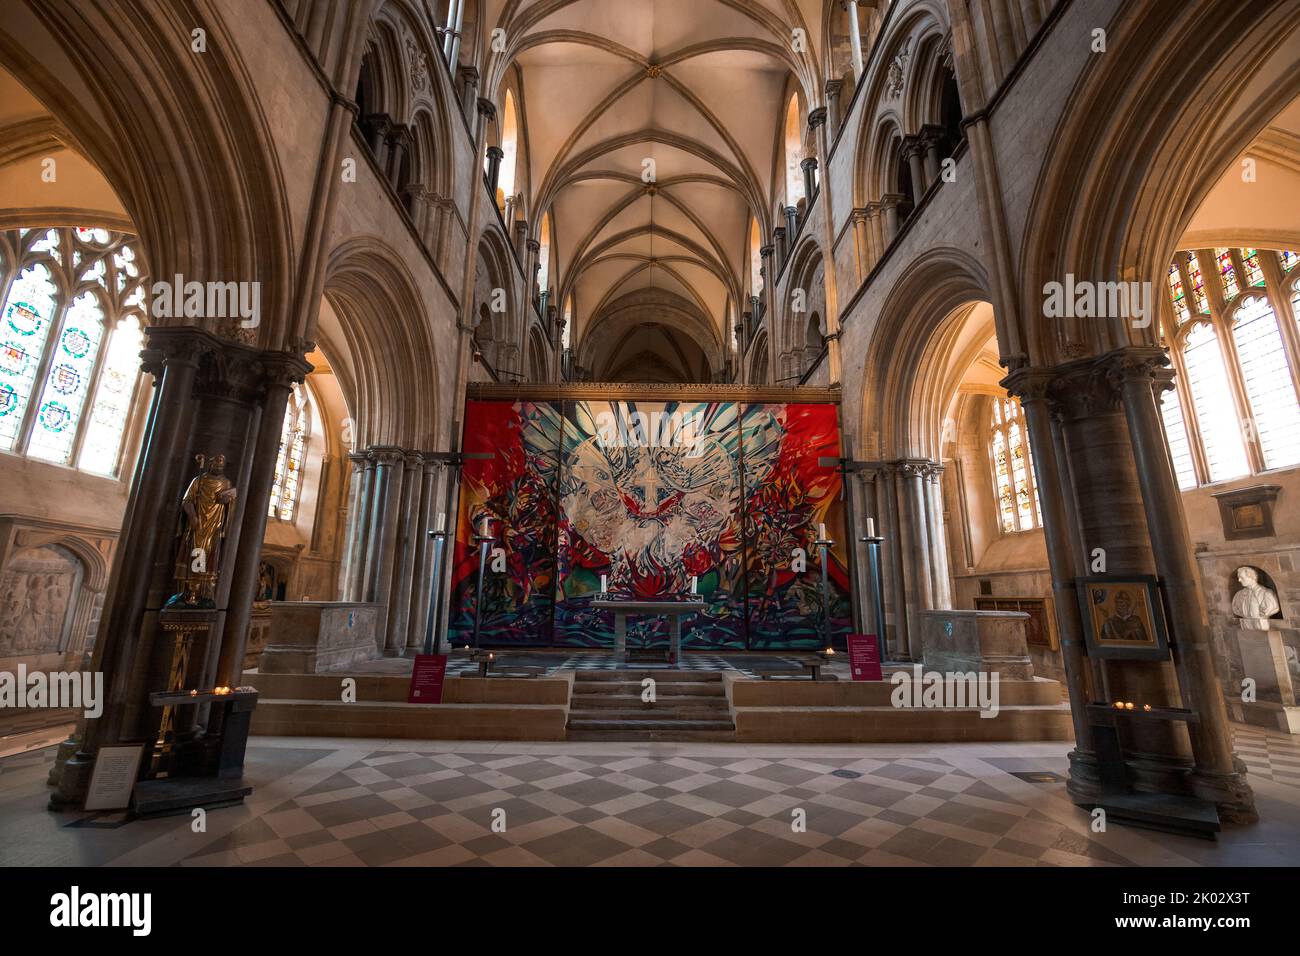 The interior look of the Chichester Cathedral with high arches, United Kingdom. Stock Photo